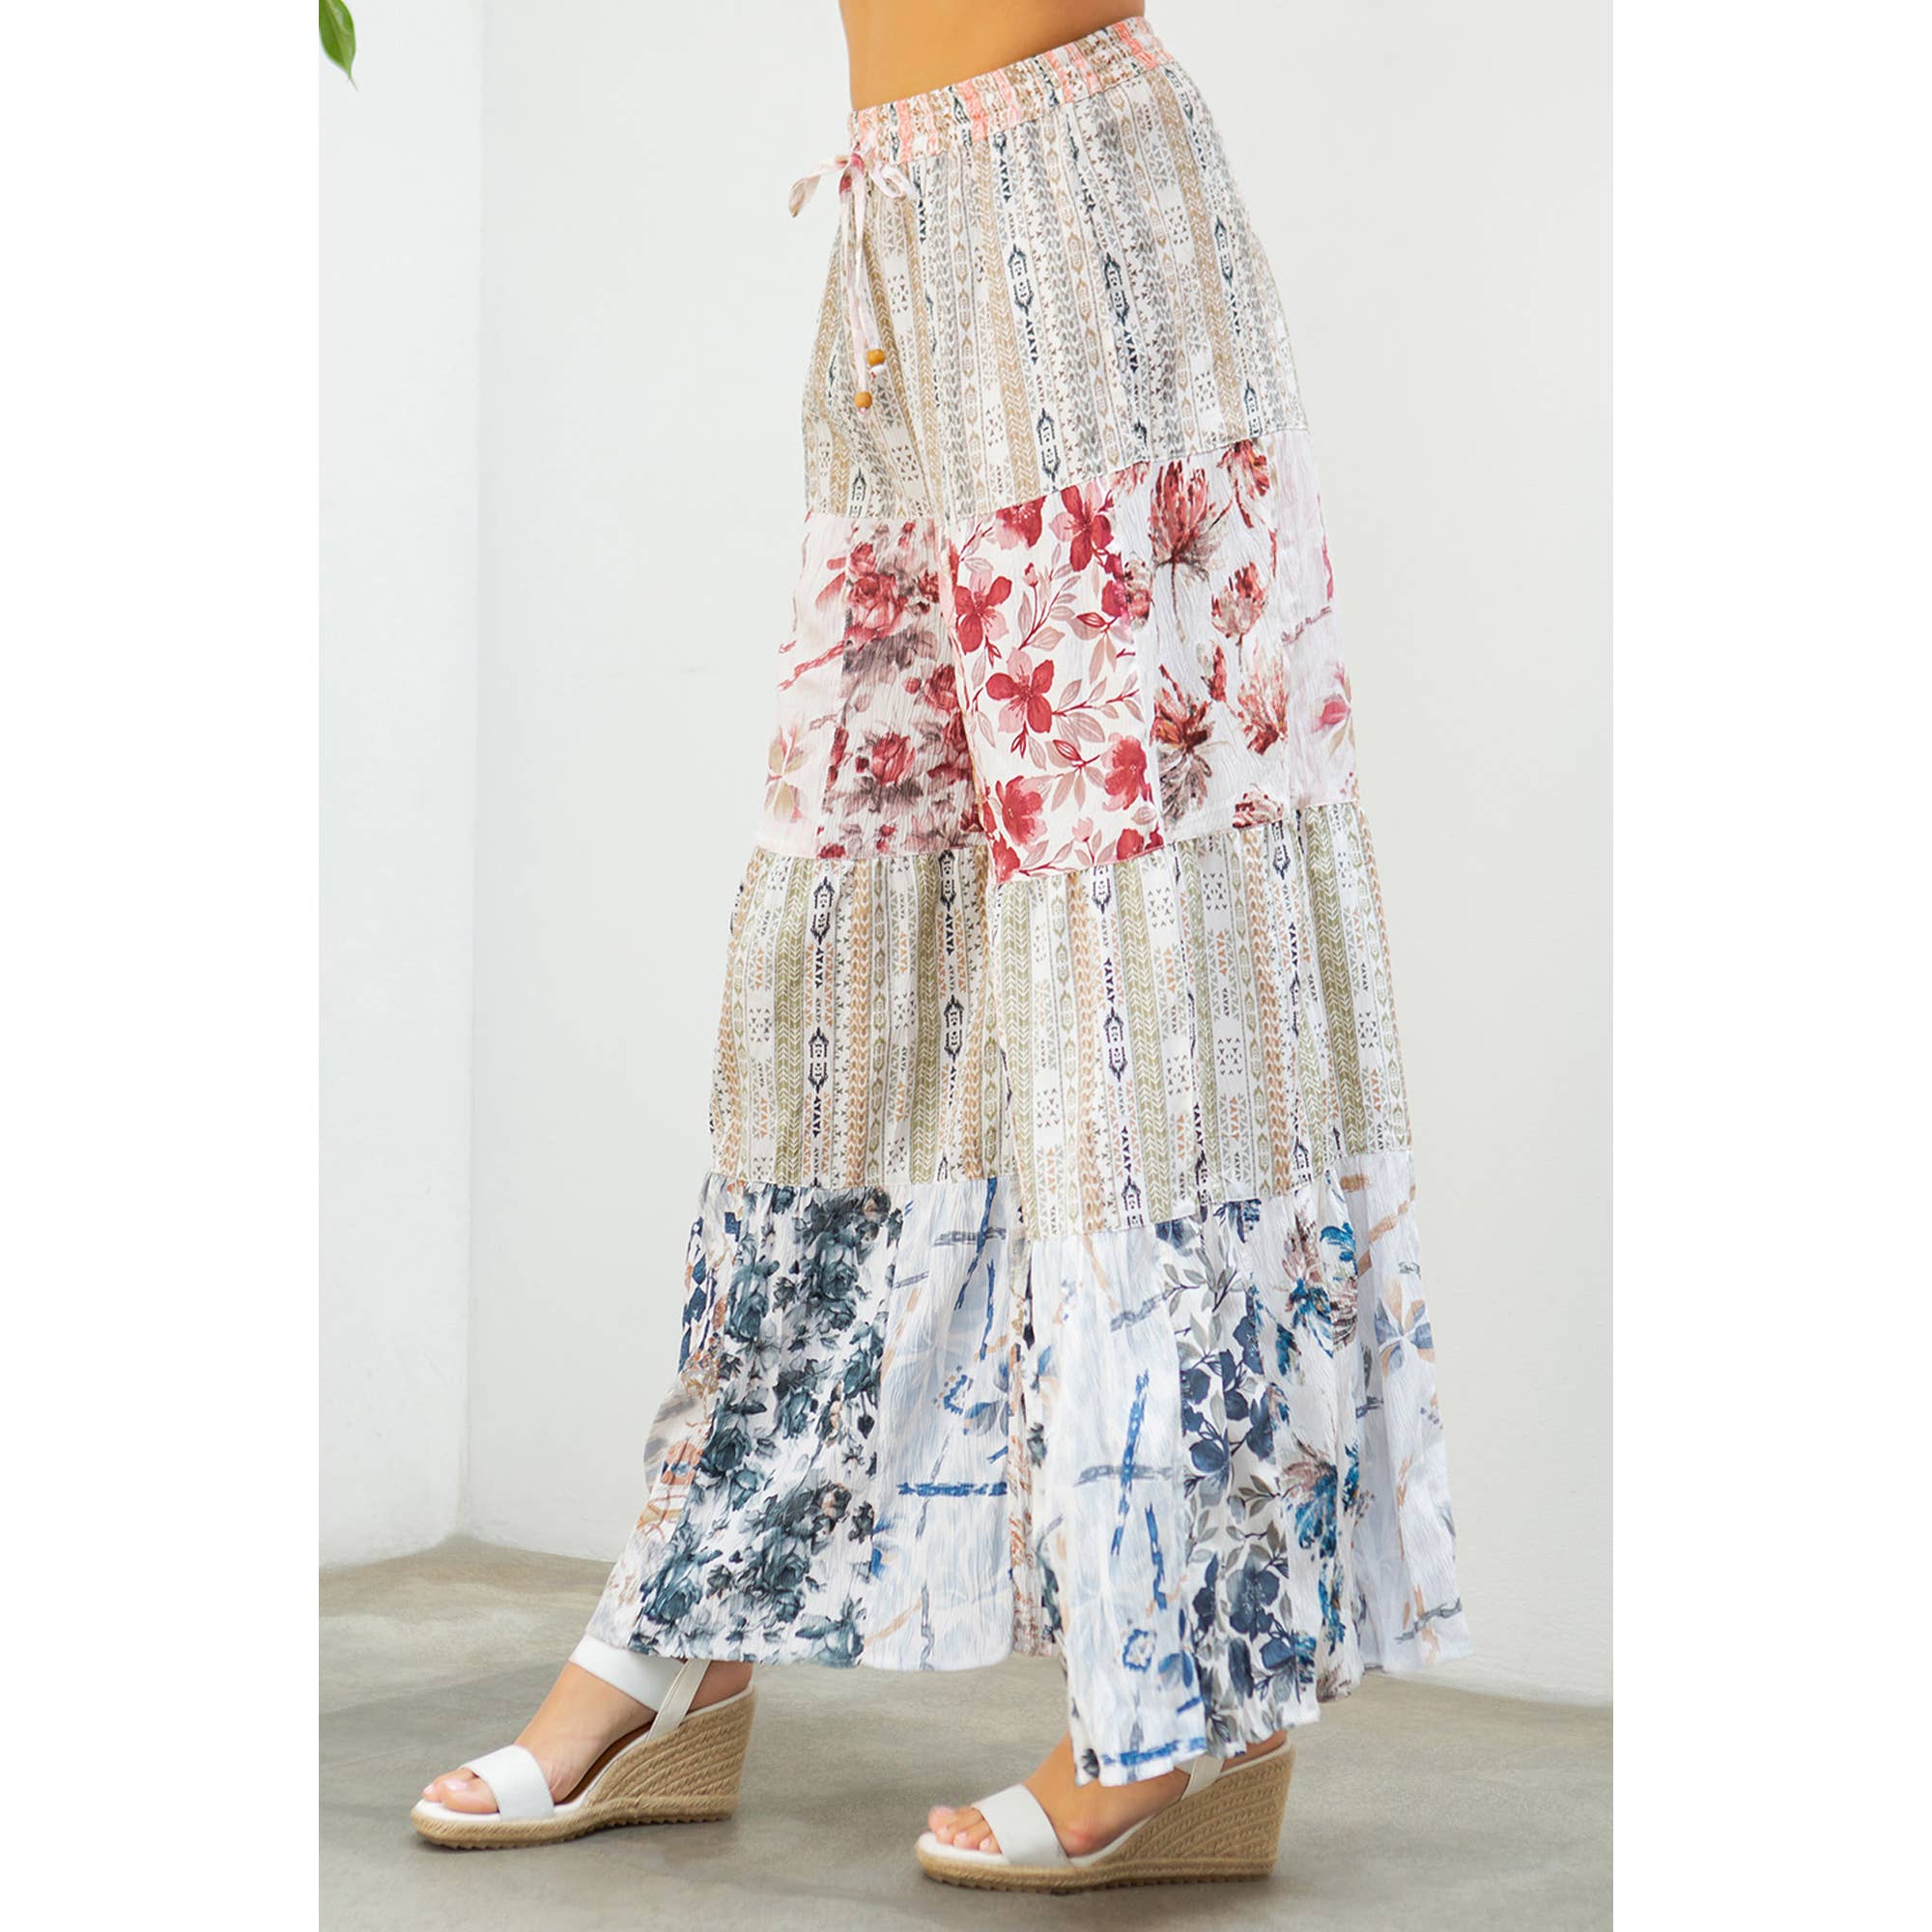 Bohemian Chic: Tiered Bell Bottom Pants